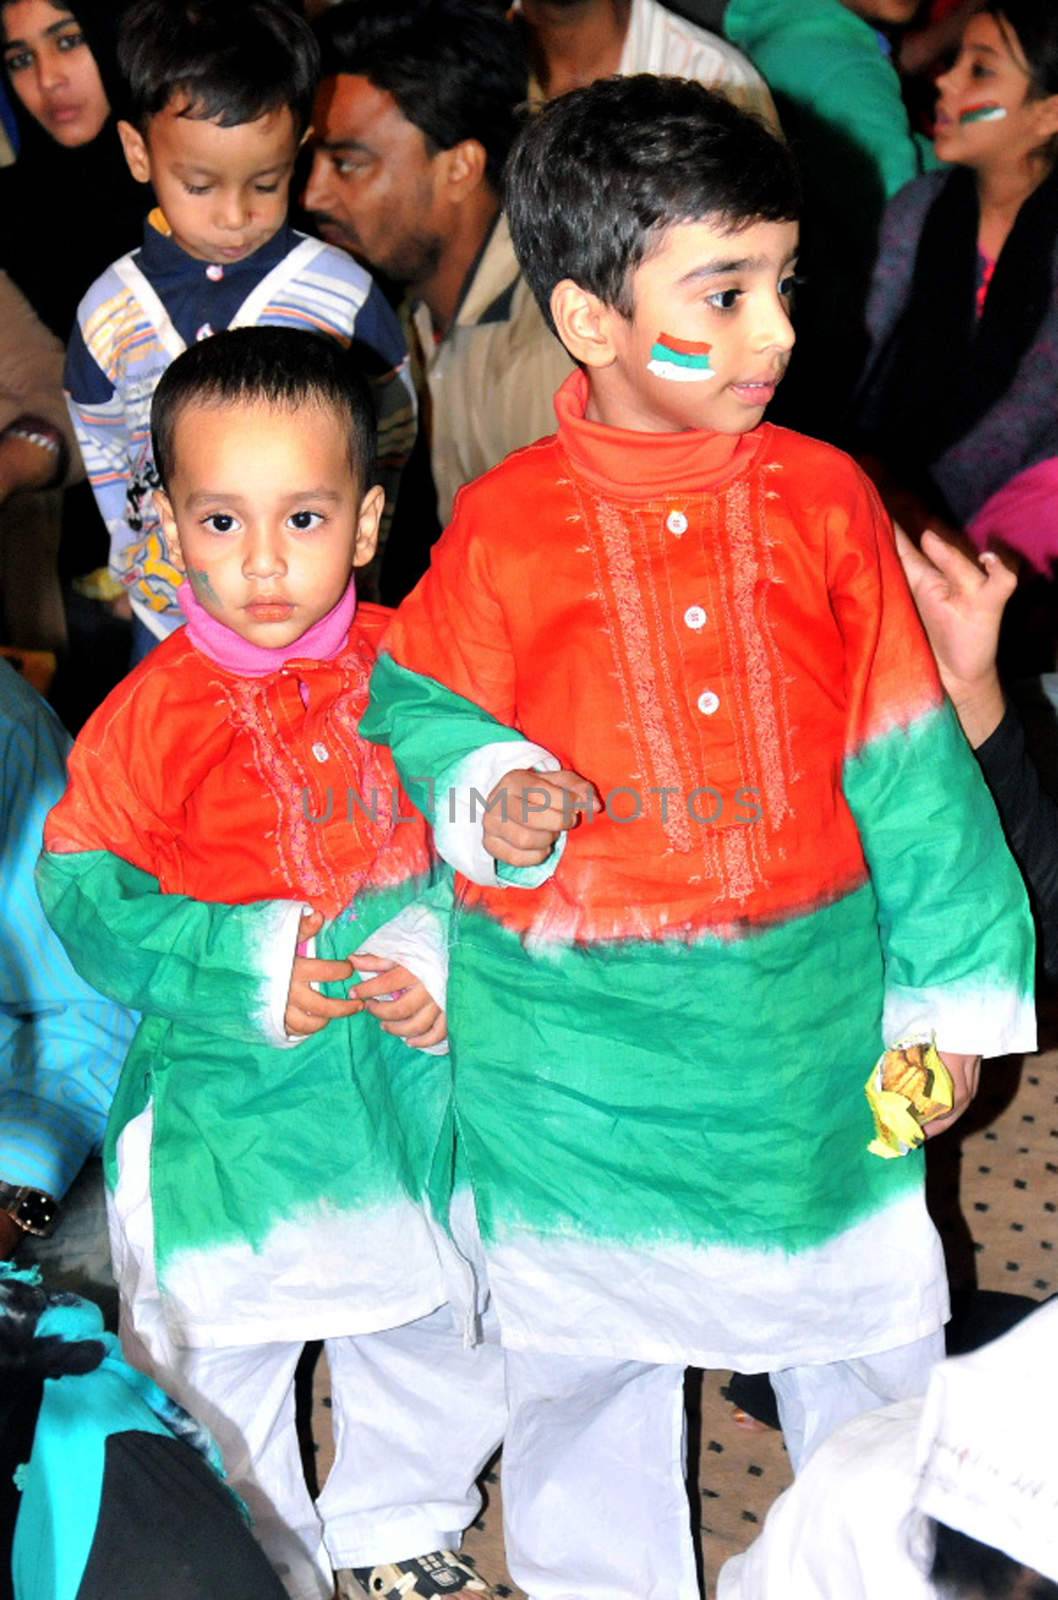 PAKISTAN, Karachi: Two children are among the crowds of people gather on December 6, 2015 to celebrate the victory of Muttahida Qaumi Movement (MQM) by waving flags and dressing in the party's colours.  The MQM rejoiced over its massive victory in the third and final phase of the local government polls. The crowd gathered in Karachi's Jinnah ground while fireworks were also displayed. The results are unofficial and inconclusive but will be announced tomorrow as well as the mayor of Karachi. 